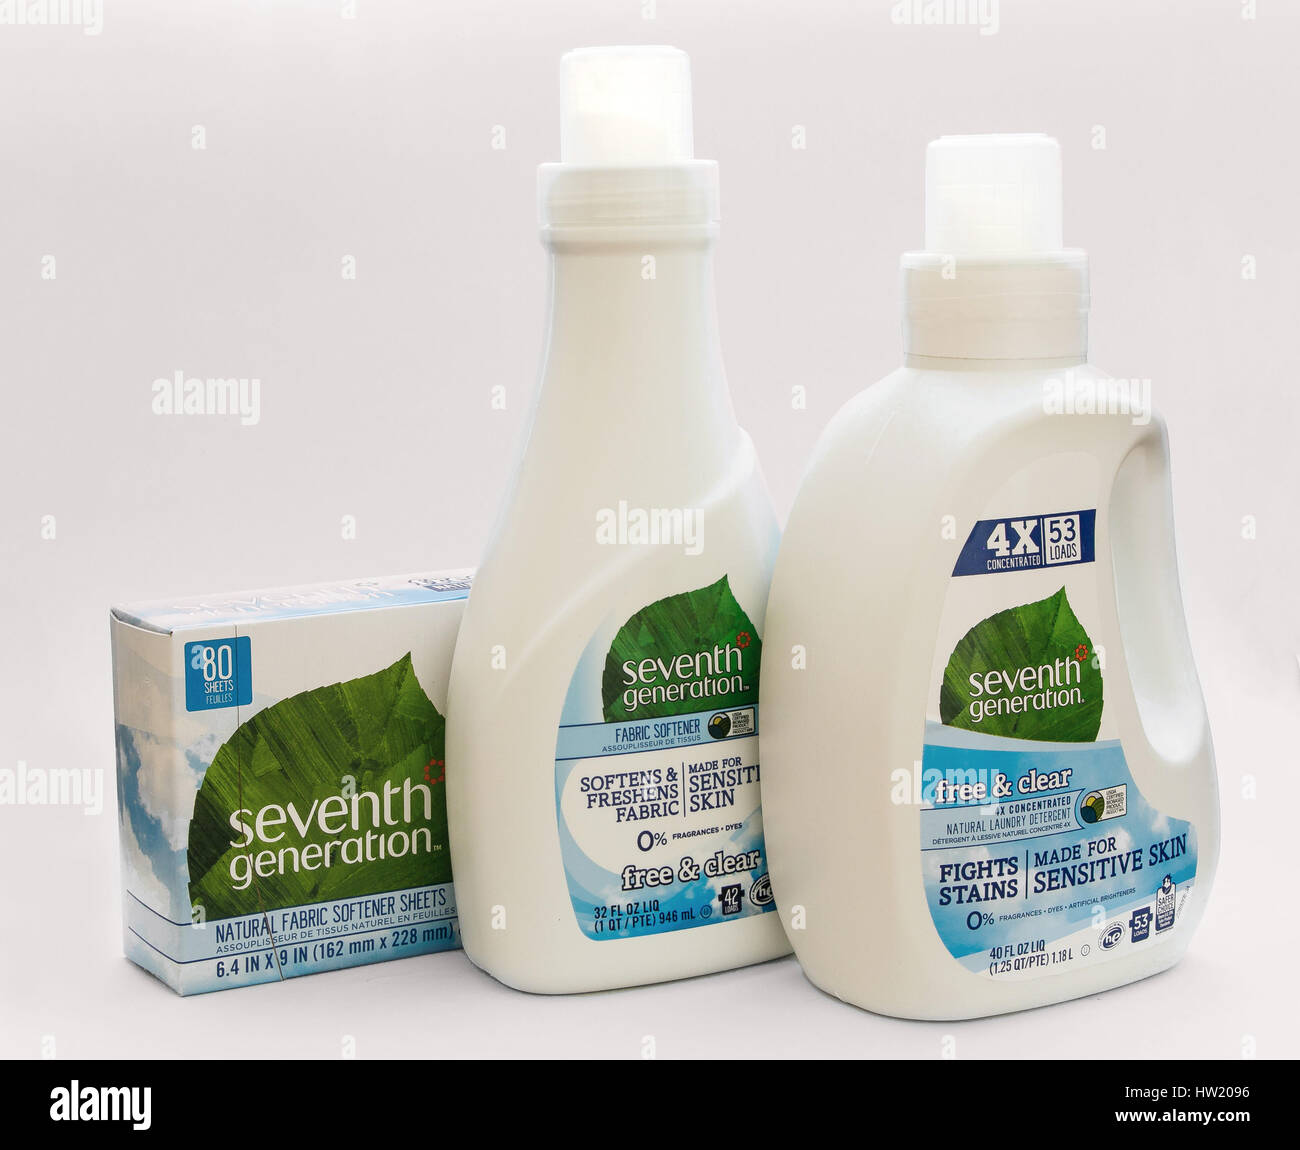 A set of Seventh Generation laundry detergent, fabric softener liquid and sheets for the dryer. Stock Photo